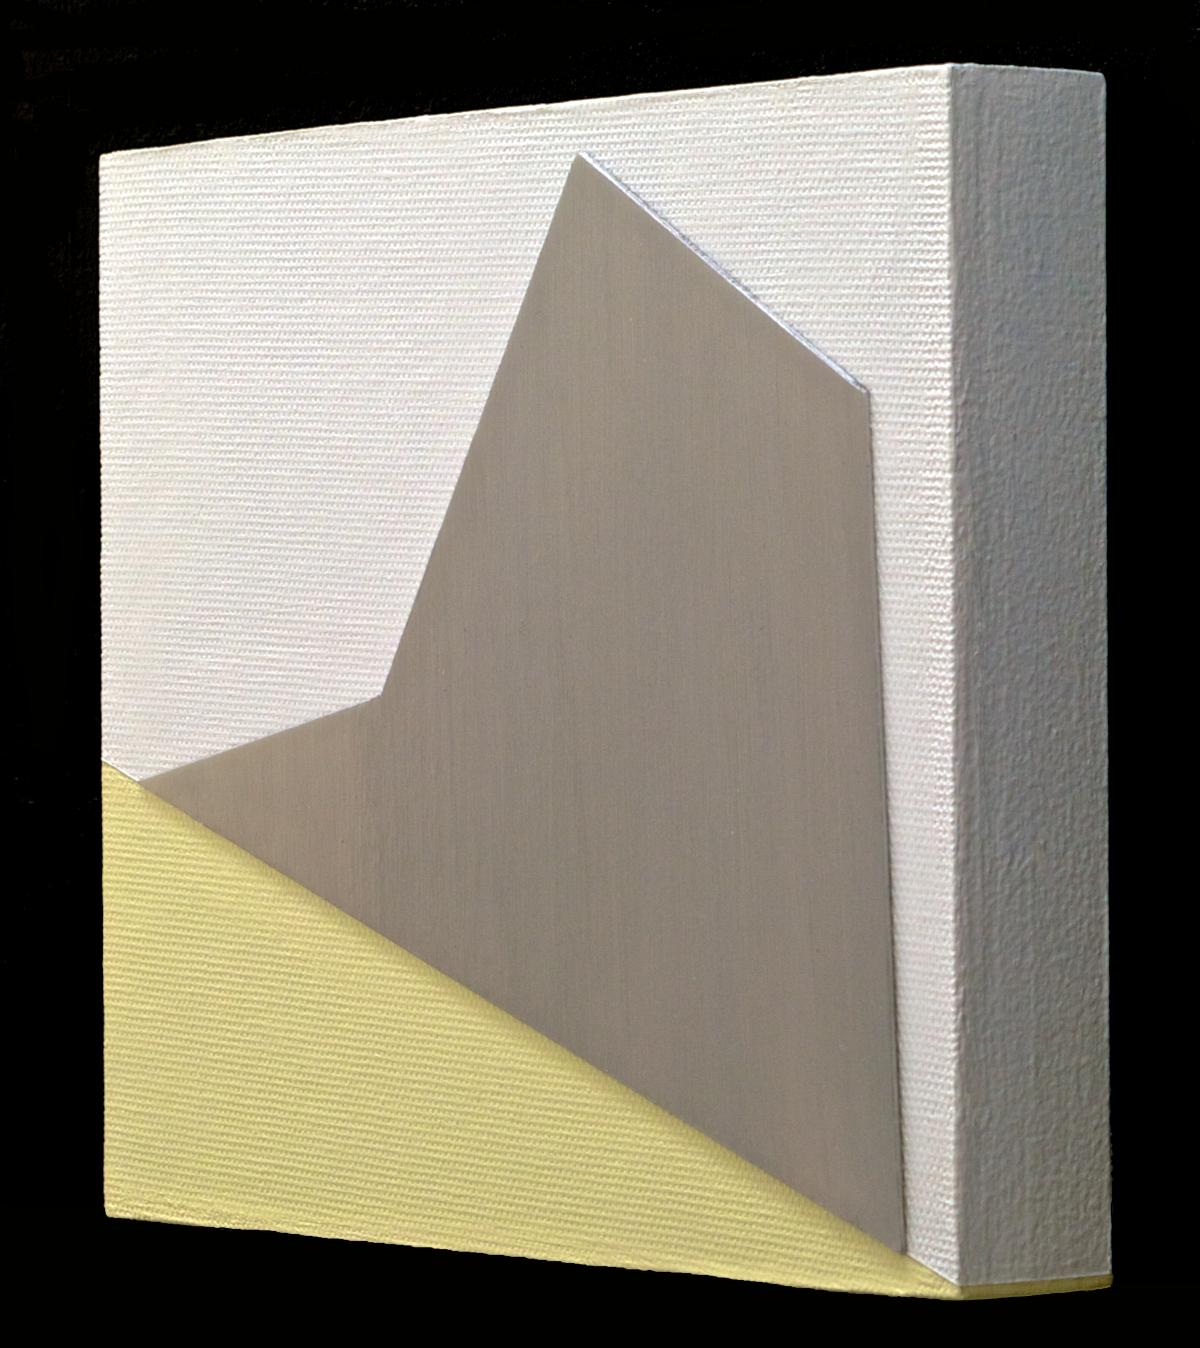 Modernist / Minimalist Painting - Collage / Construction  MATERIALS: Mercury Acrylic Paint on 1/16th Inch Shaped Archival Plexiglas Collage on Canvas - Archival mount to Gessoed Birch Wood Panel  SIZE: 6 x 8 x 1 inch Deep  SERIES: "Dimensional